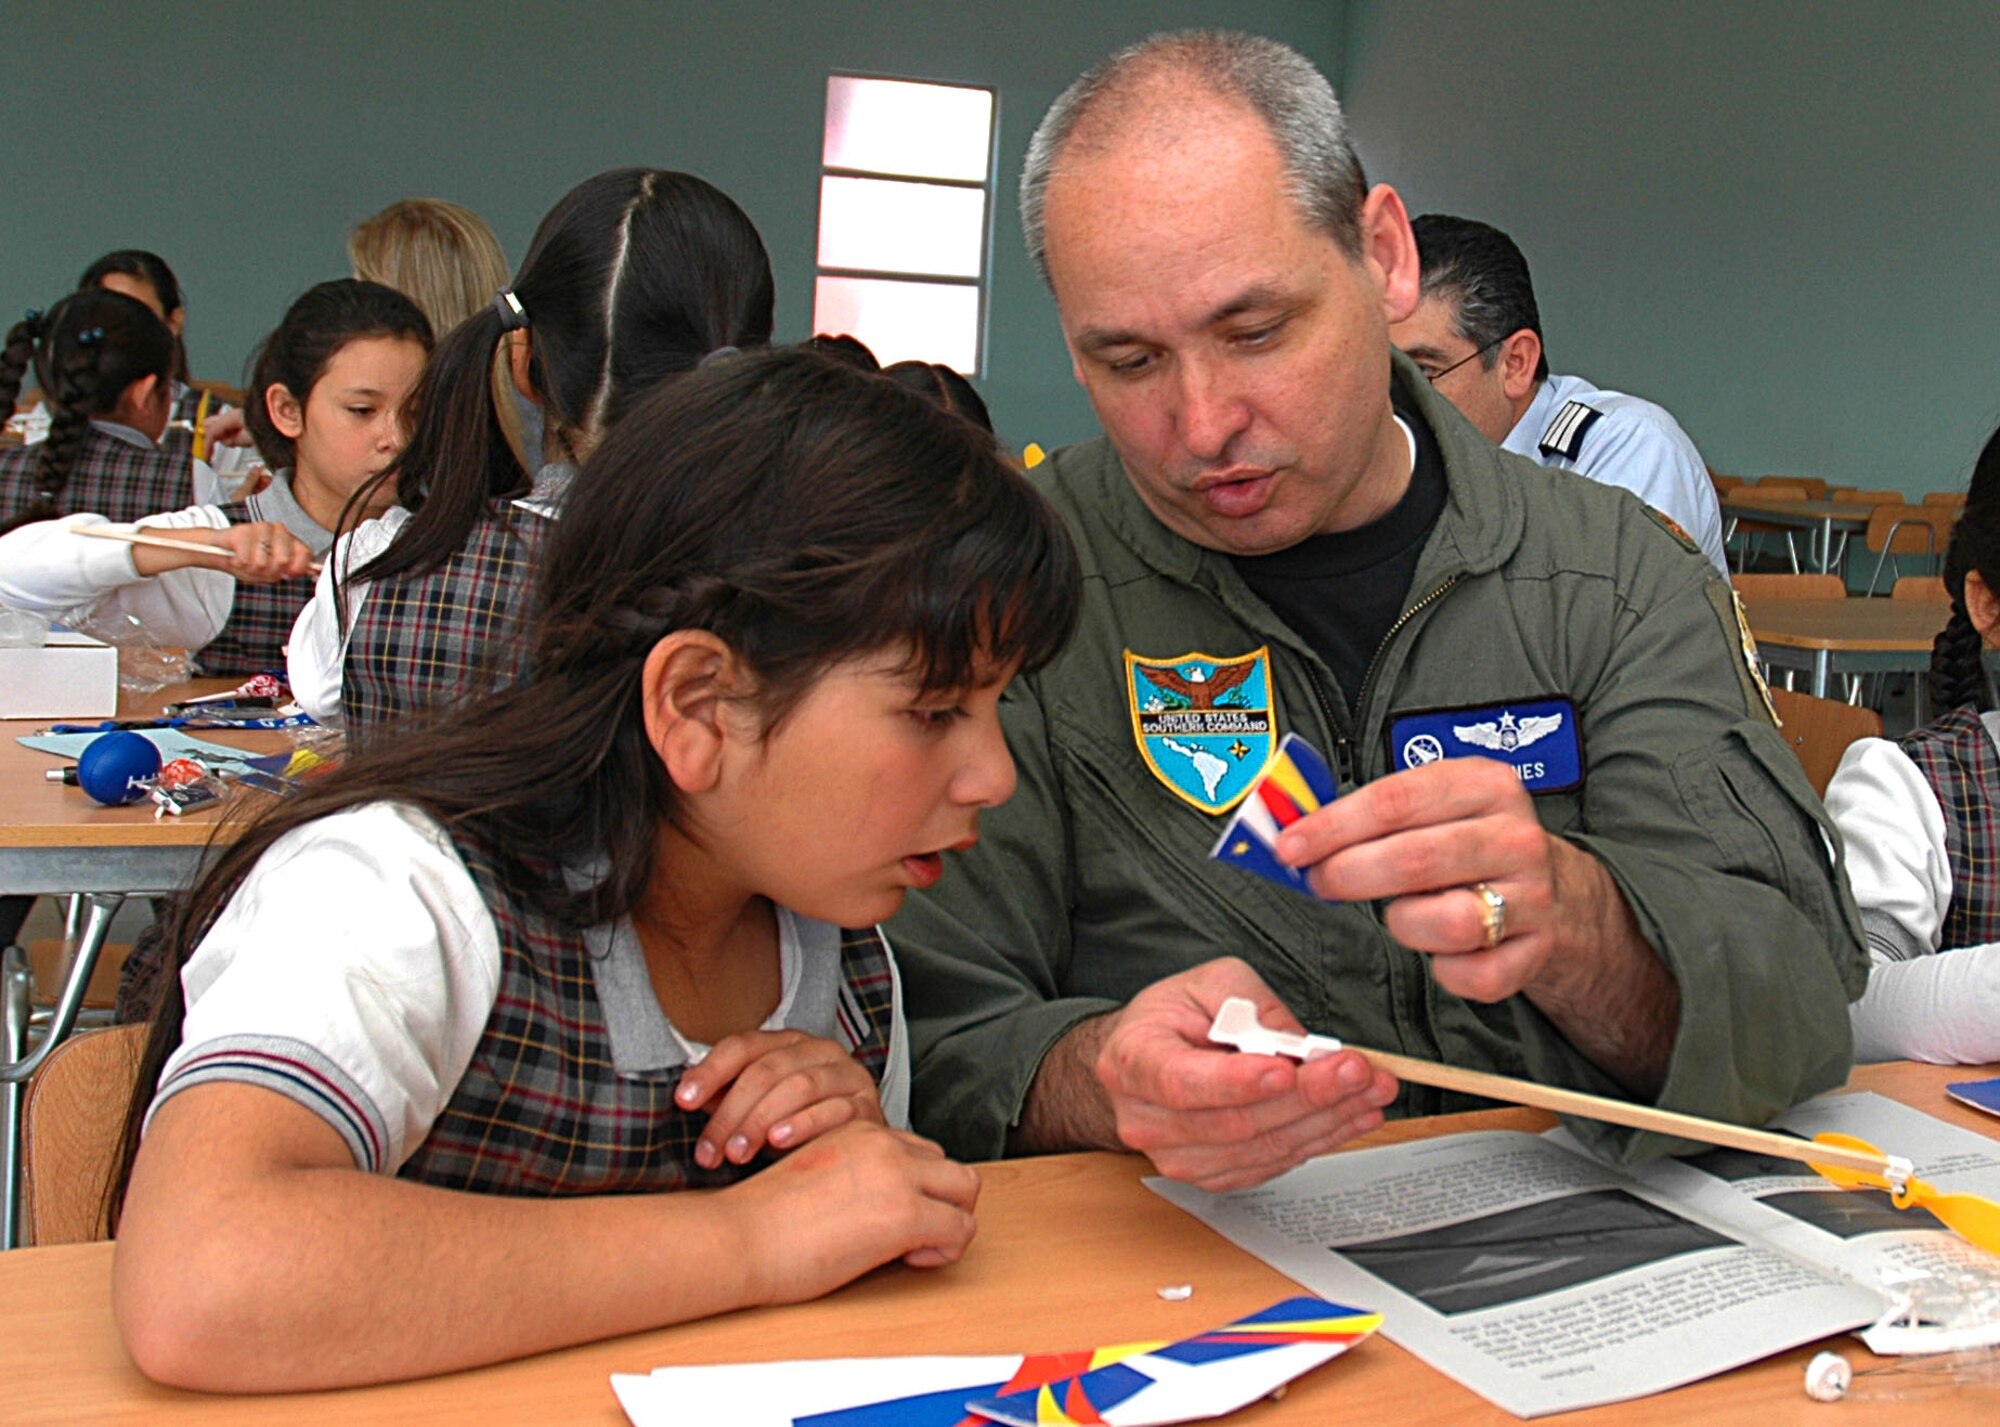 Maj. Mark Jones, operations officer for the U.S. Military Group in Chile, assists a a student at the Complejo Educacional Esperanza School in Santiago, Chile, during a community outreach event on Oct. 27. The outreach program is part of Operation Southern Partner, an Air Forces Southern-led exchange aimed at providing intensive, periodic subject matter exchanges with partner nations in the U.S. Southern Command area of focus. (U.S. Embassy photo/Jose Nuños)